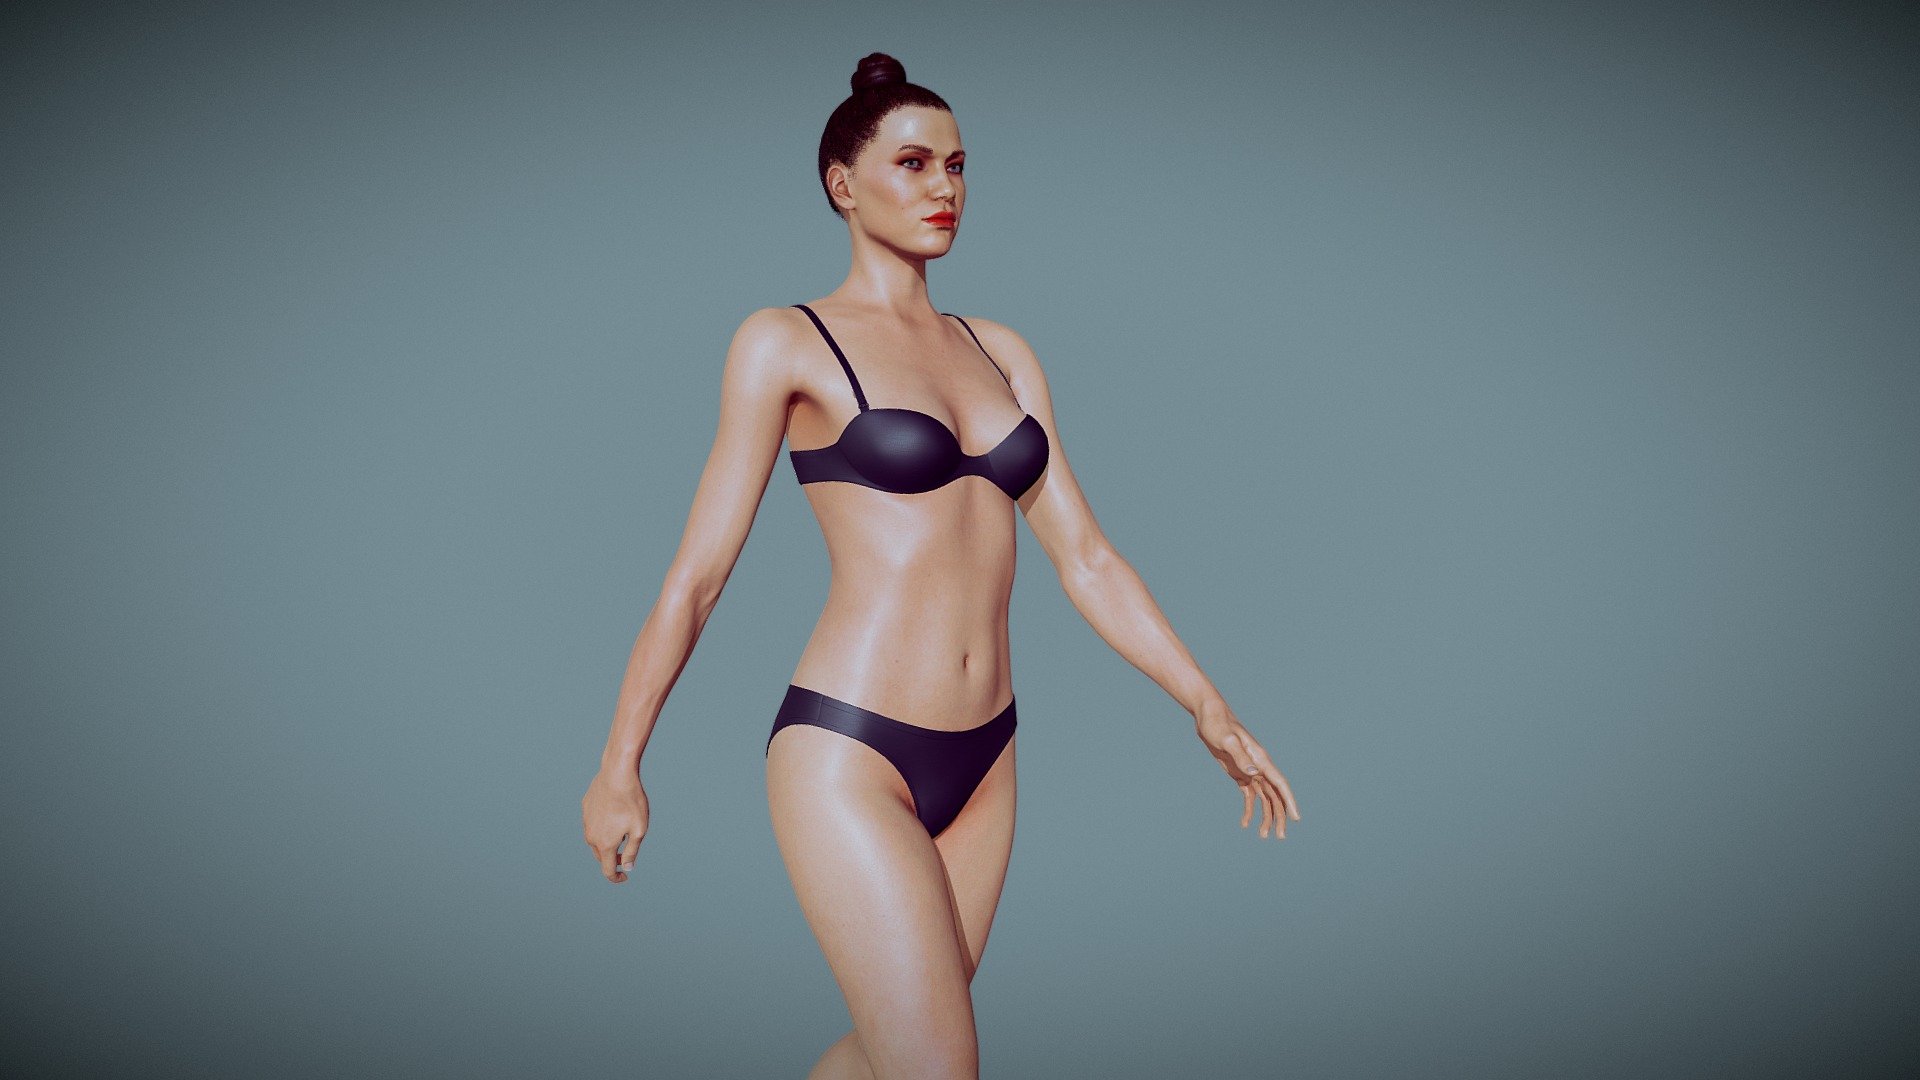 This is a PBR model for real time engines such as Unreal Engine or Unity, however it may be used with other renderers (i.e. mental ray, v-ray, etc). Fully textured, it has clean and efficient edge flow. This model can be purchased HERE - Average Female Body - 3D model by alexlashko 3d model